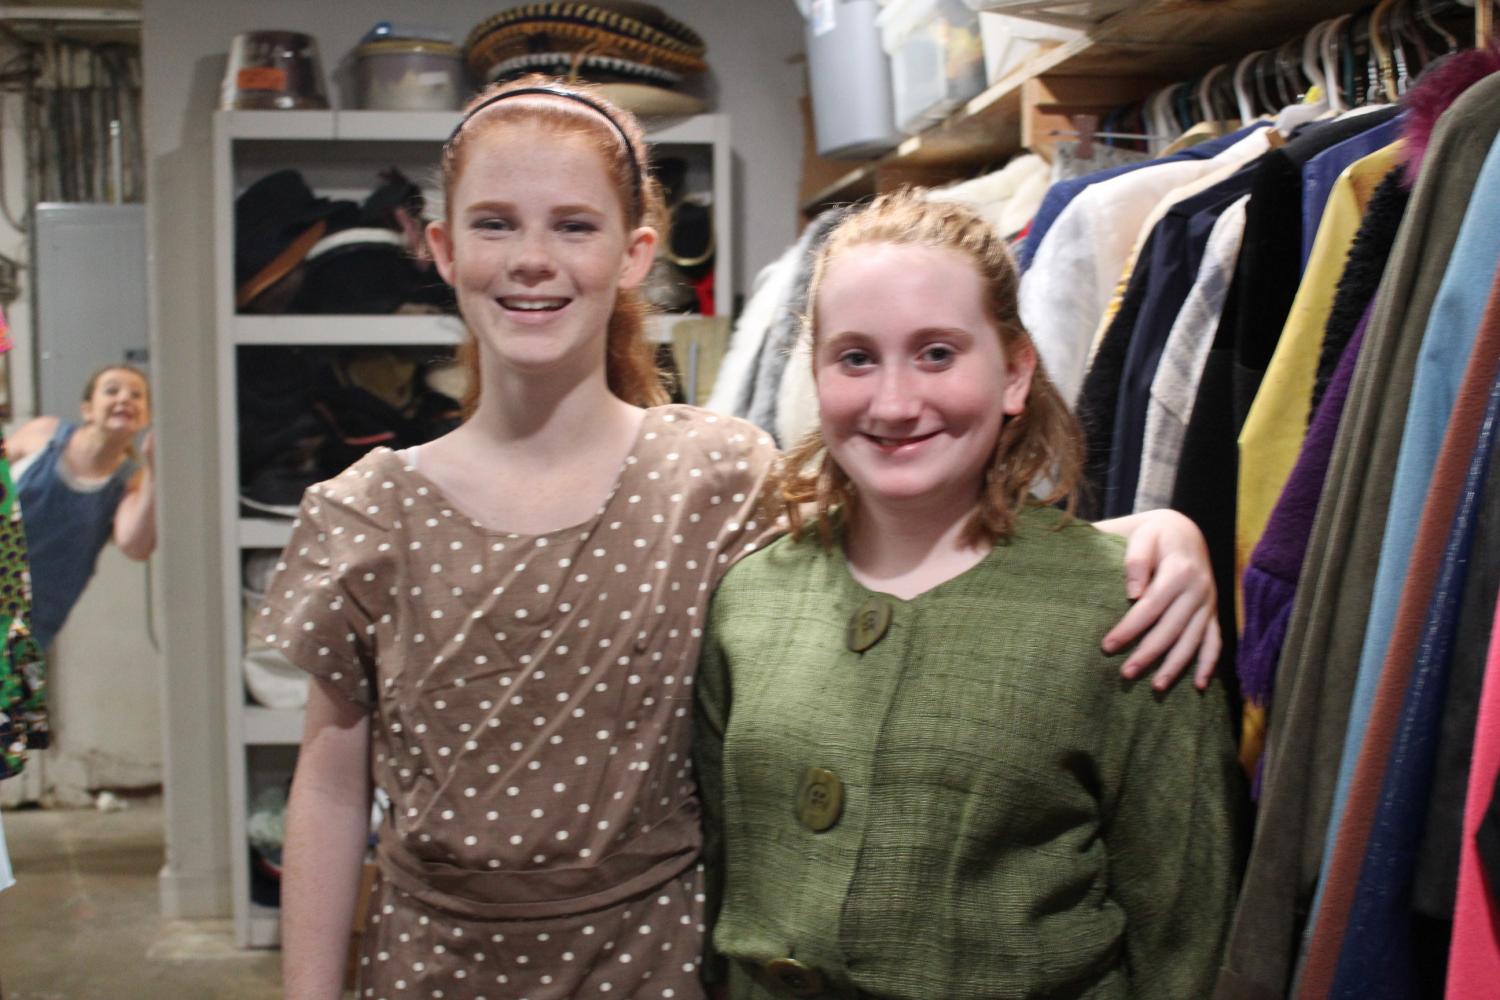 Seventh-graders Natalie Waters and Elle Baker are among the cast members in The Fantastic Mr. Fox.